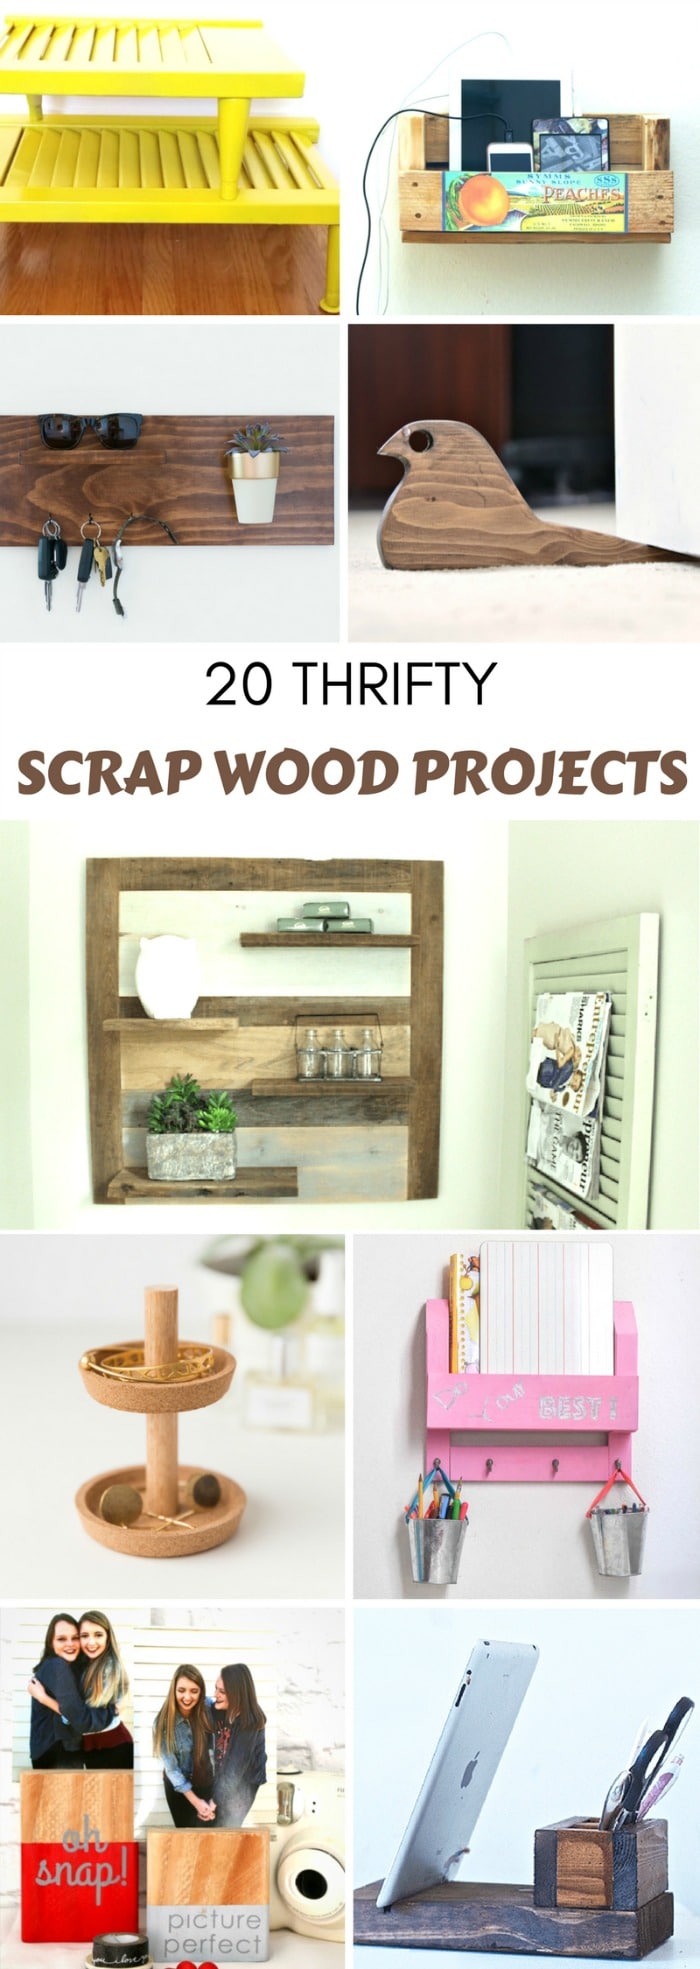 Transform Old Scrap Wood into an Amazing DIY Project